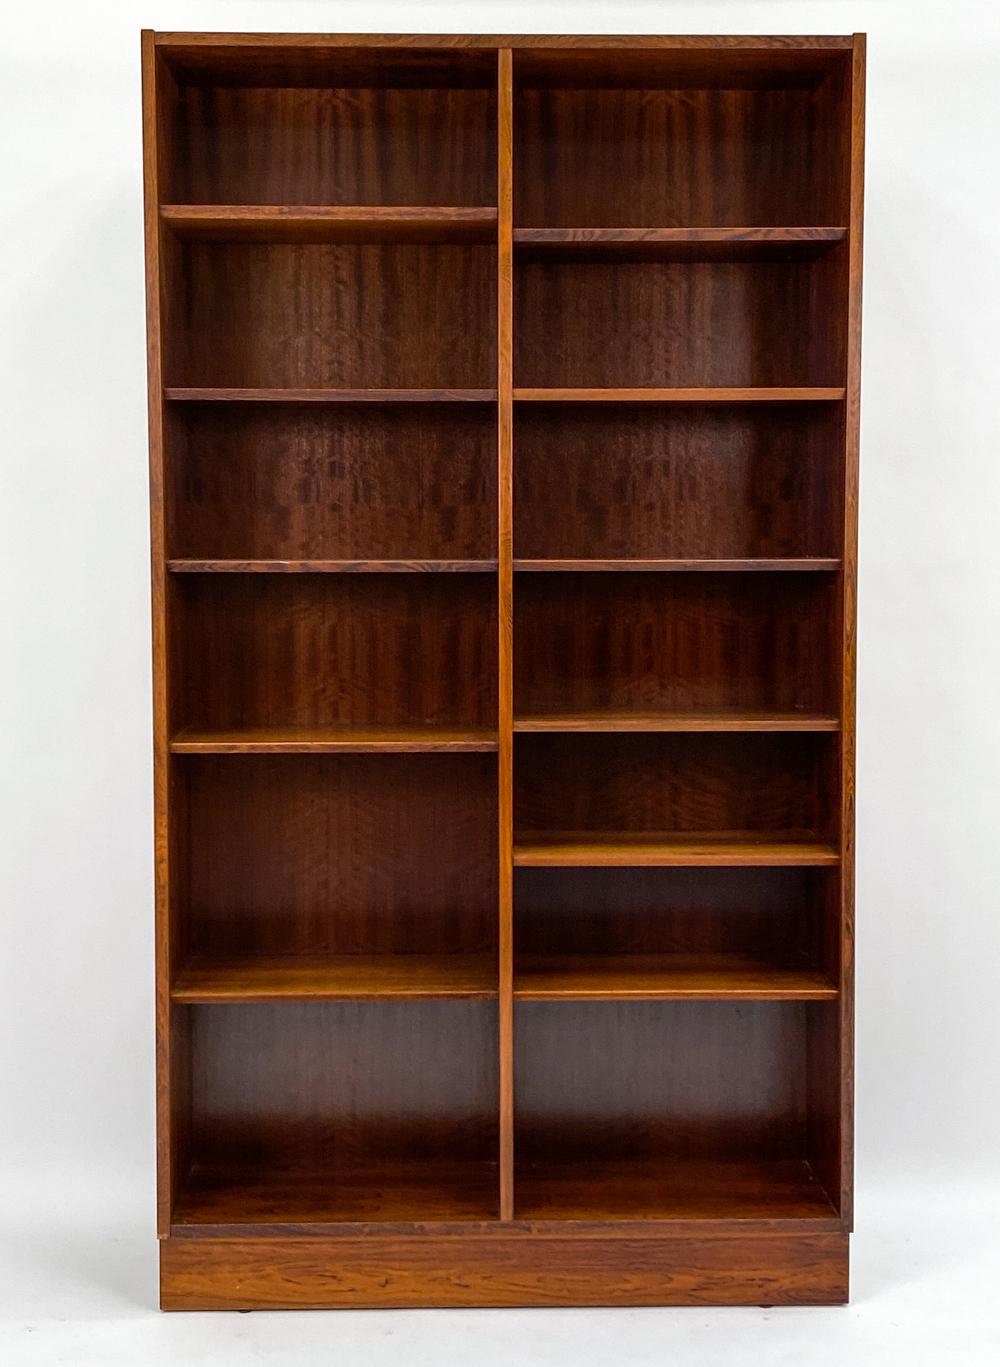 A handsome Danish mid-century double bookcase in fine rosewood veneer, designed by Carlo Jensen for Poul Hundevad, c. 1960's. This beautiful piece features two sides of adjustable shelves in a sturdy, minimalist form to blend seamlessly into any